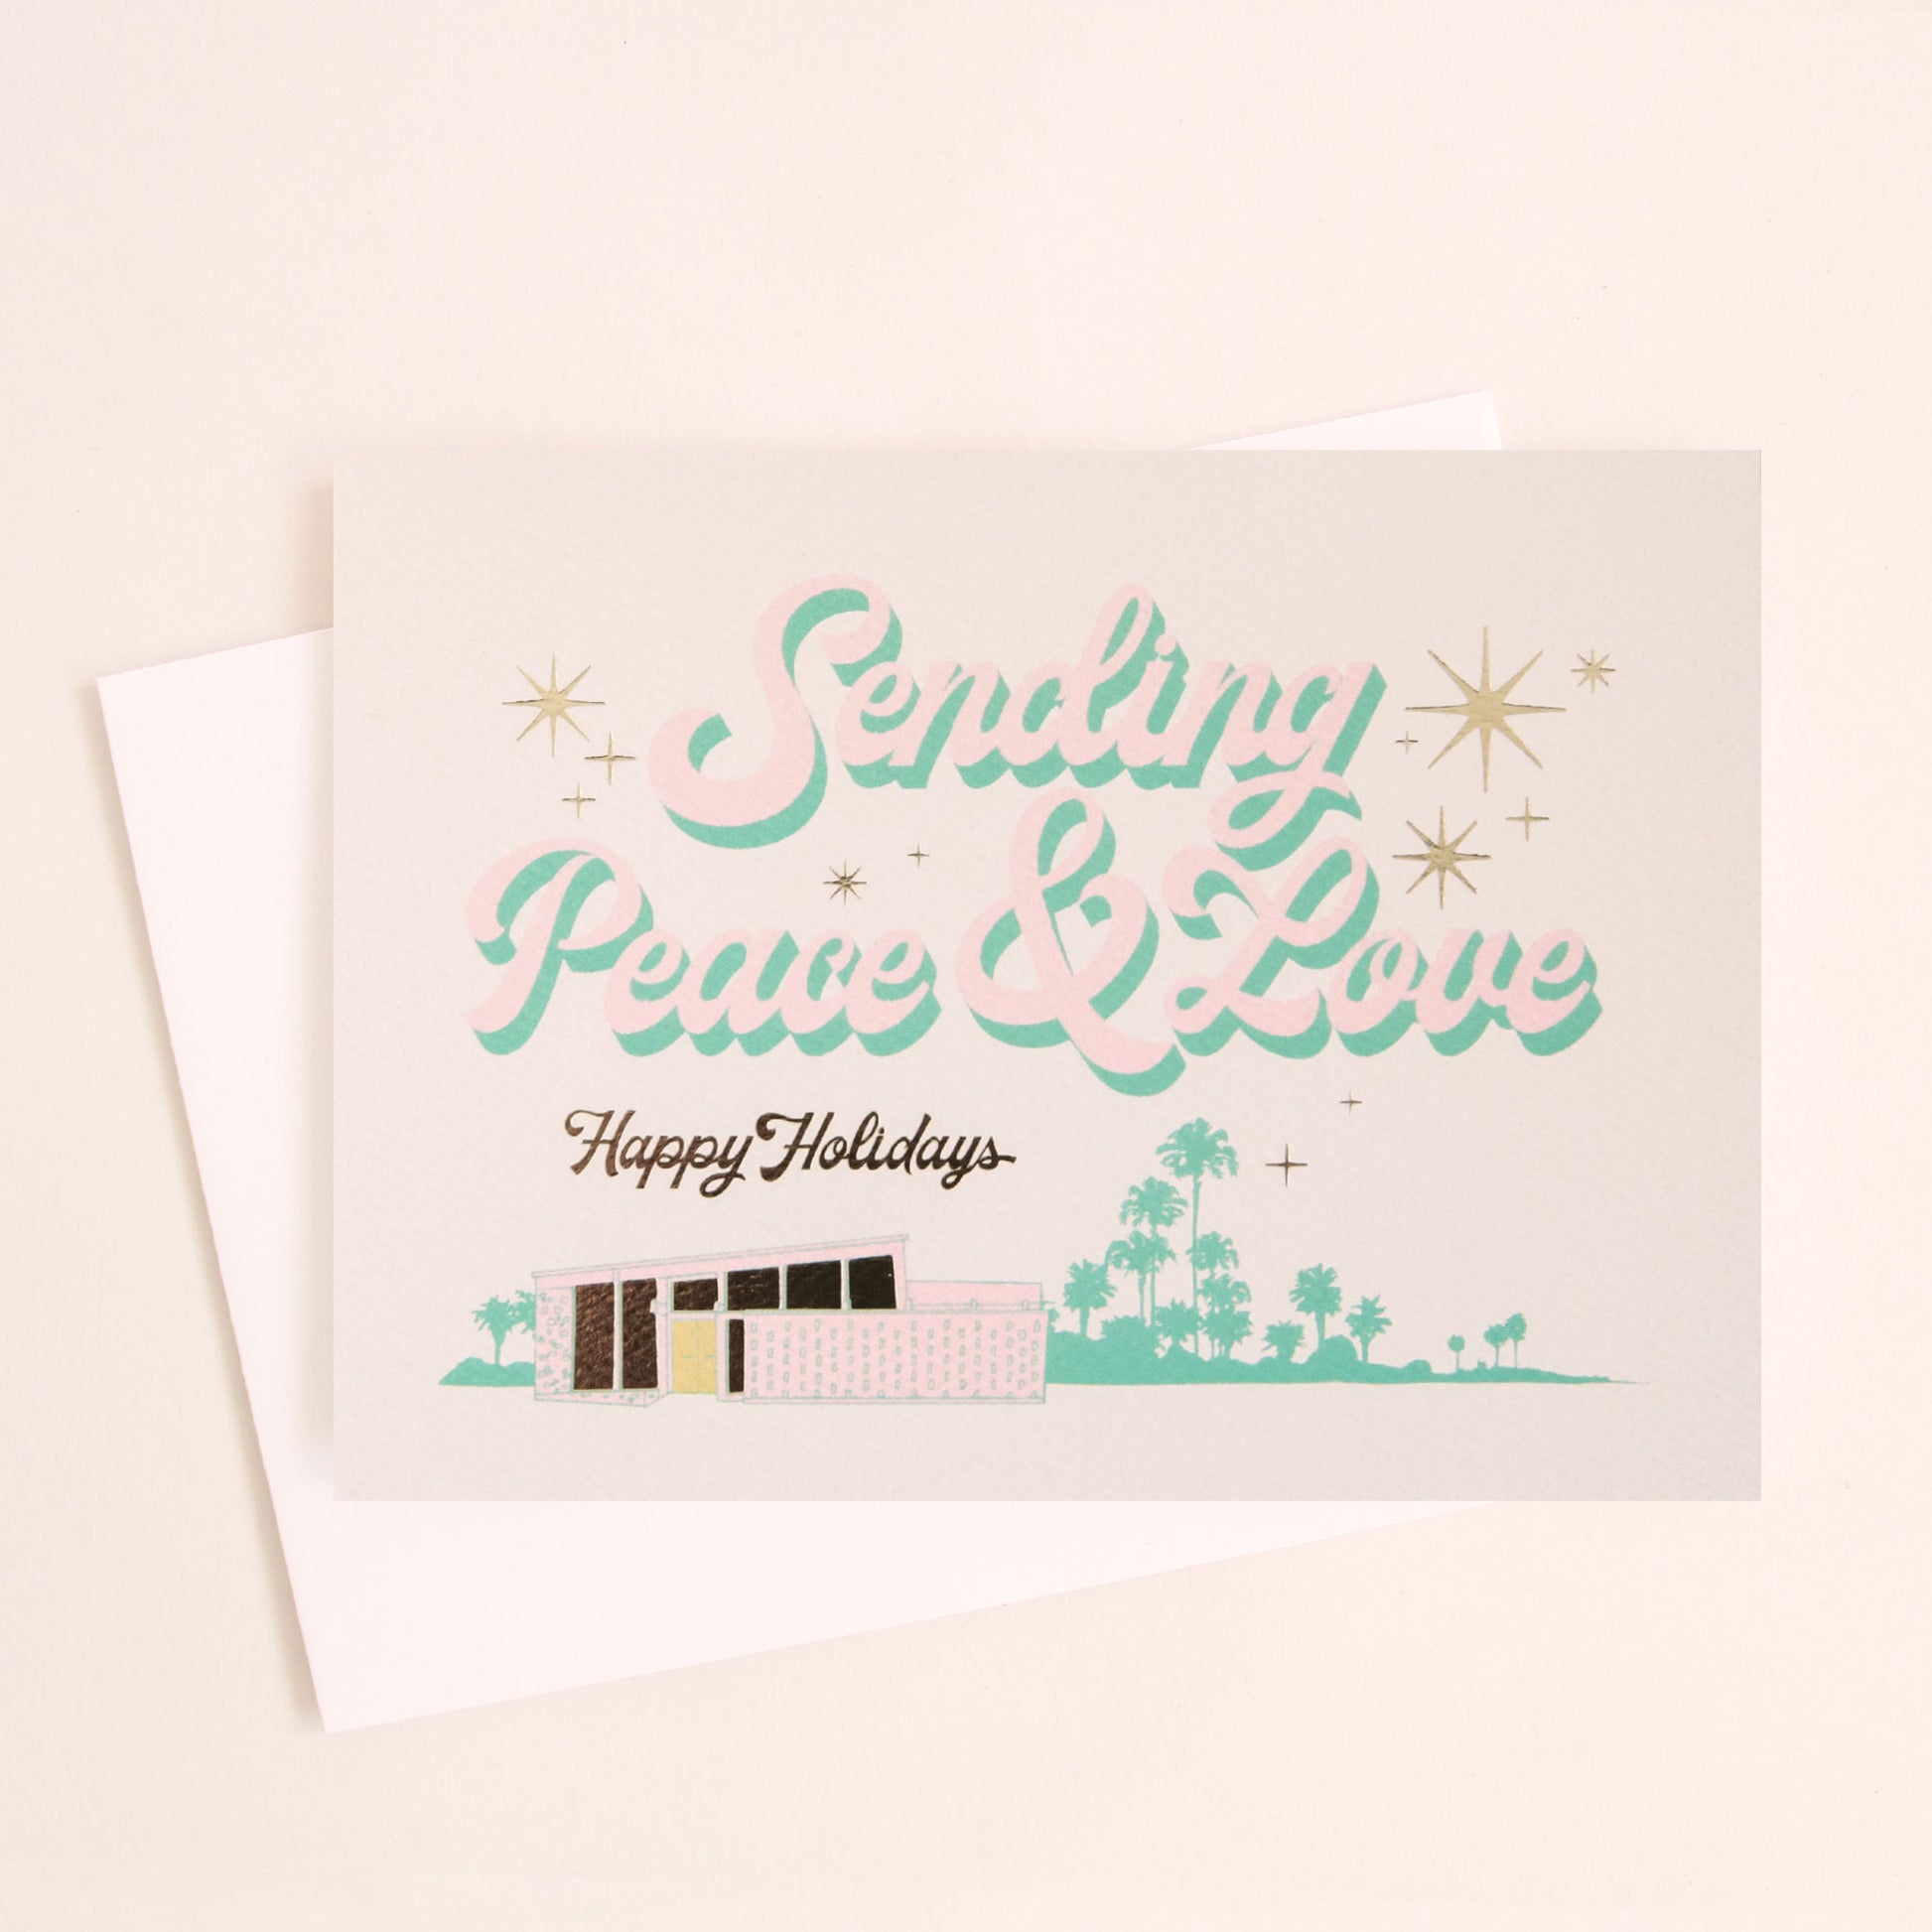 Cream card reading 'Sending Peace & Love' in soft pink lettering with seafood shadowing. Below reads 'Happy Holidays' in black cursive lettering. Below is a coastal scene of a pink beach house and sea foam palms.